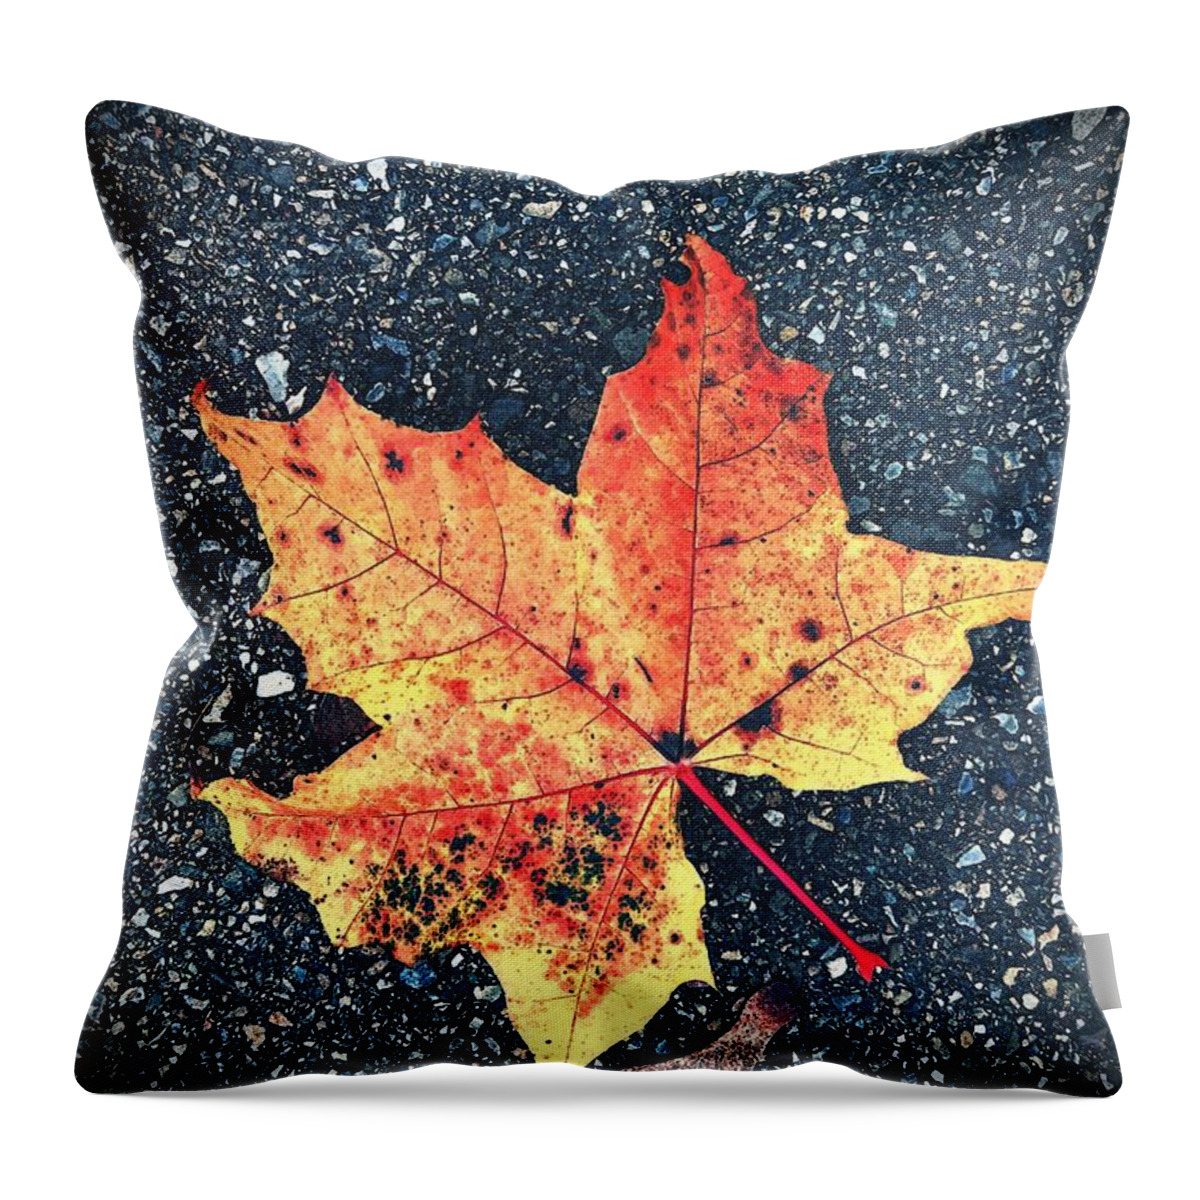 Autumn Throw Pillow featuring the photograph Maple Leaf by Claudia Zahnd-Prezioso